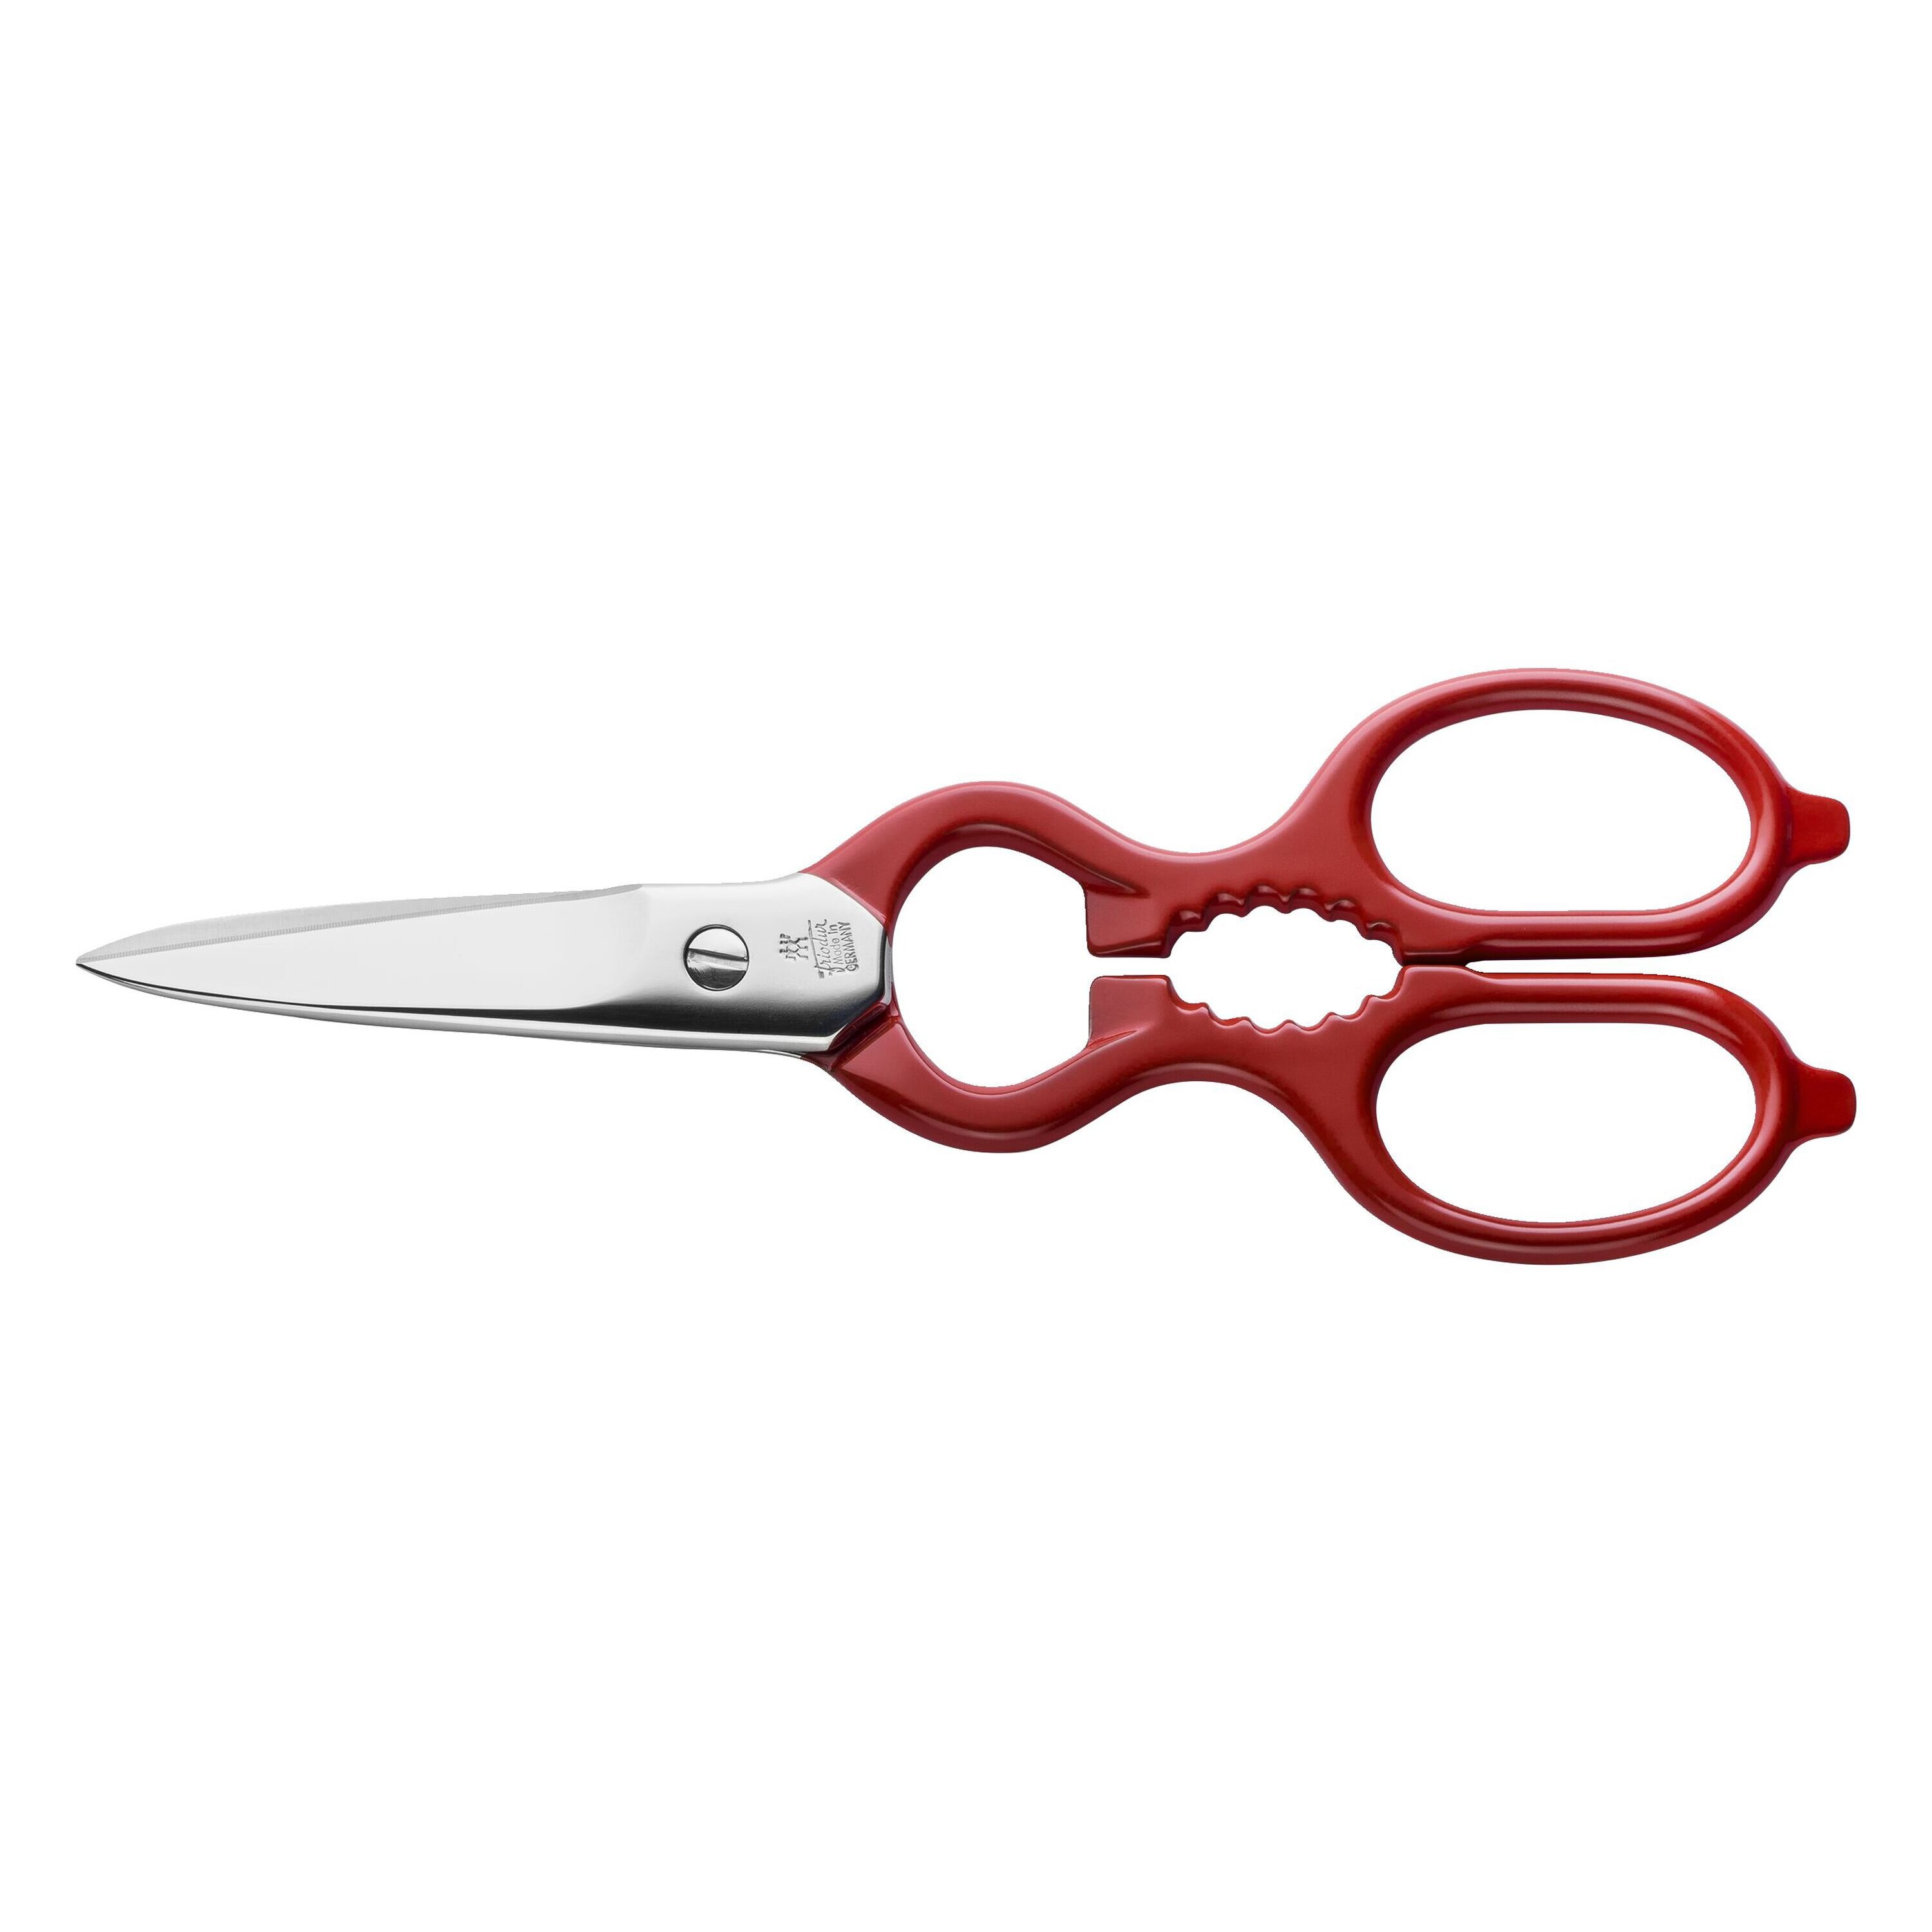 ZWILLING J.A. Henckels Forged Multi-Purpose Kitchen Shears